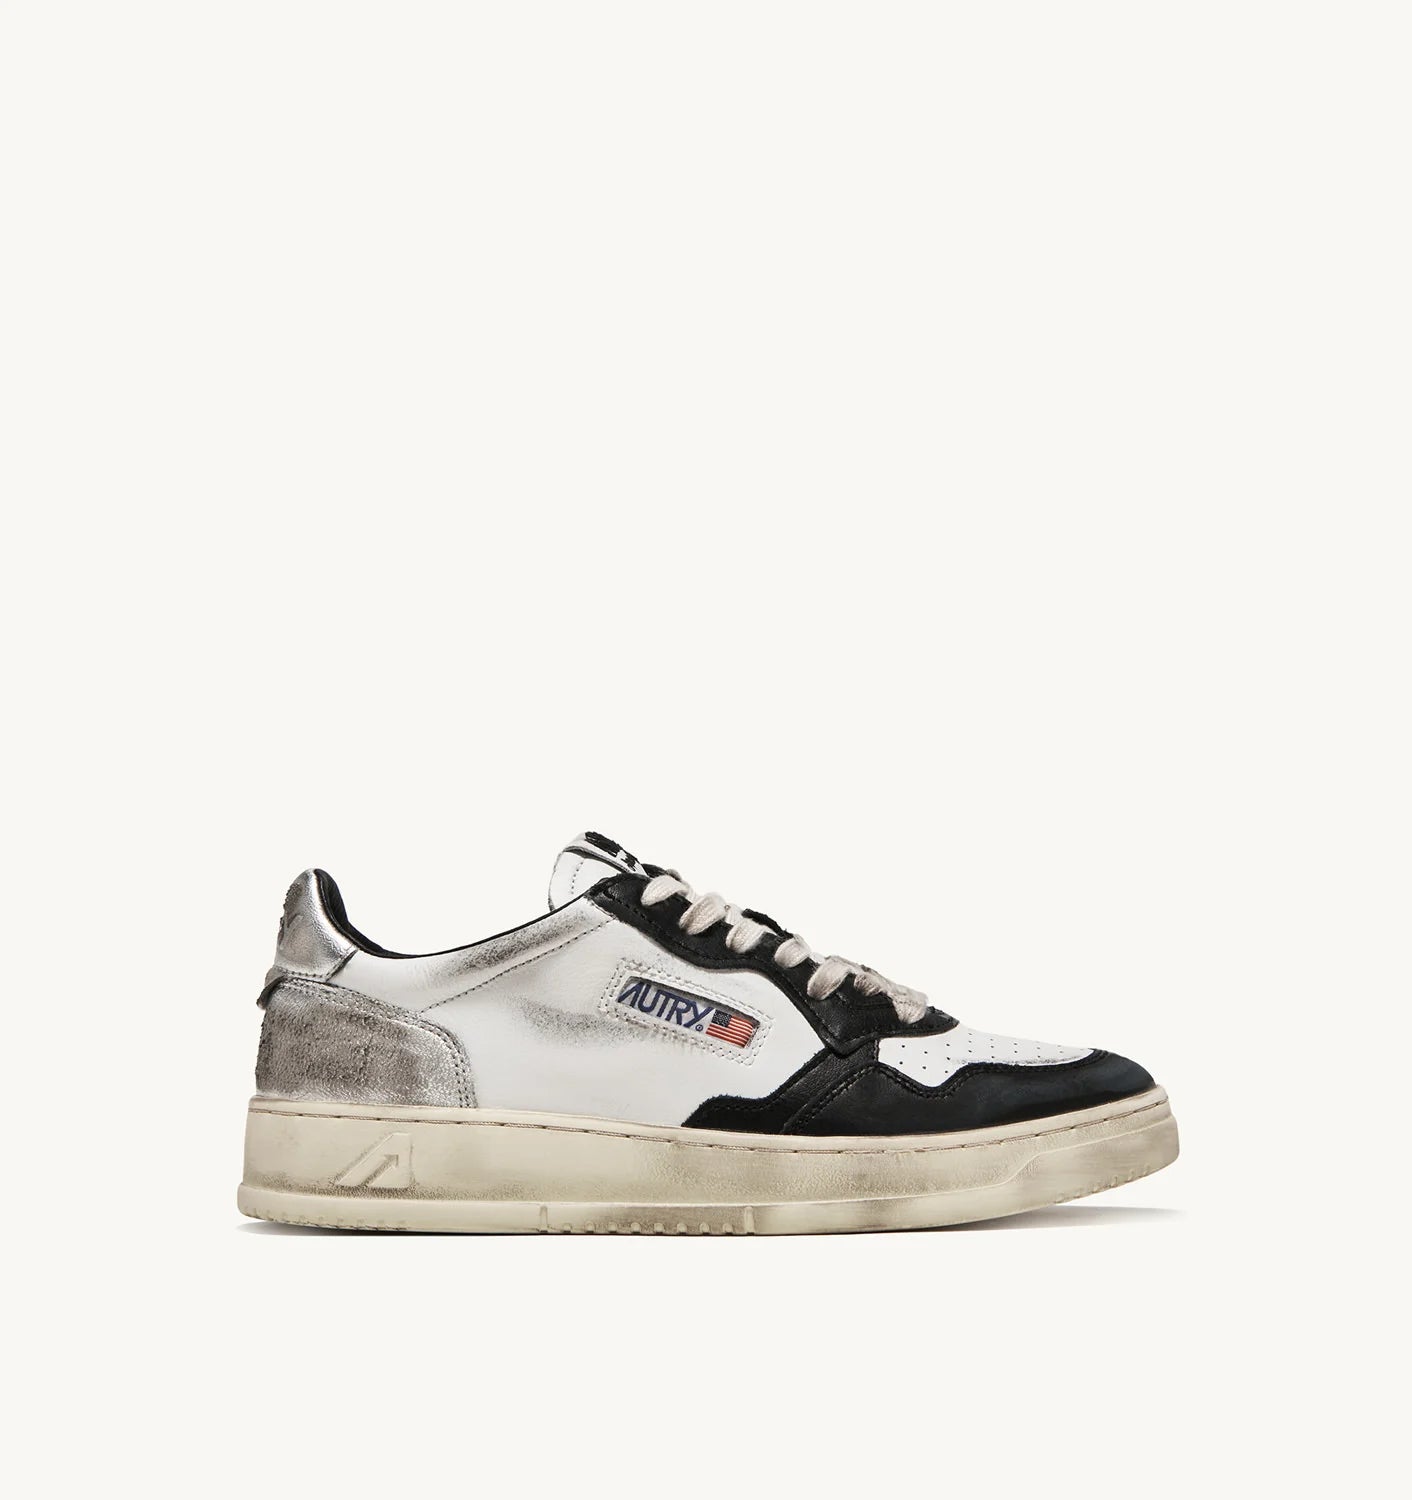 MEDALIST LOW SUPER VINTAGE SNEAKERS IN WHITE BLACK AND SILVER LEATHER AVLW-SV11